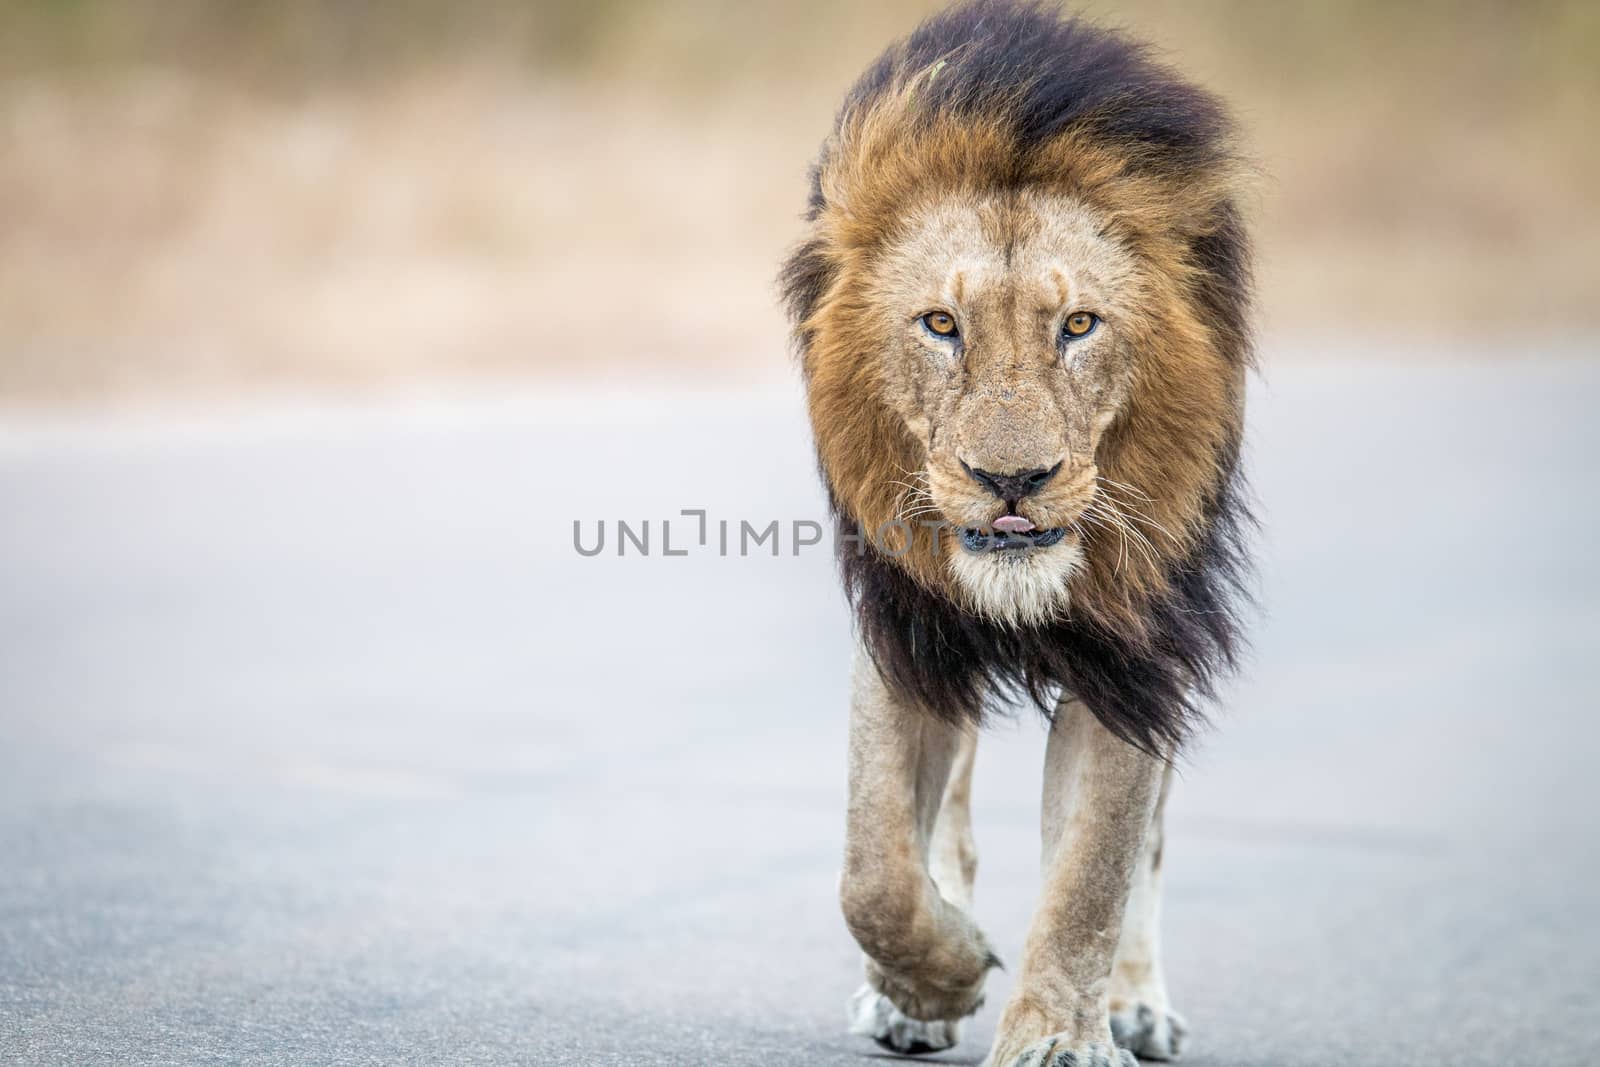 Male Lion walking towards the camera in the Kruger National Park. by Simoneemanphotography